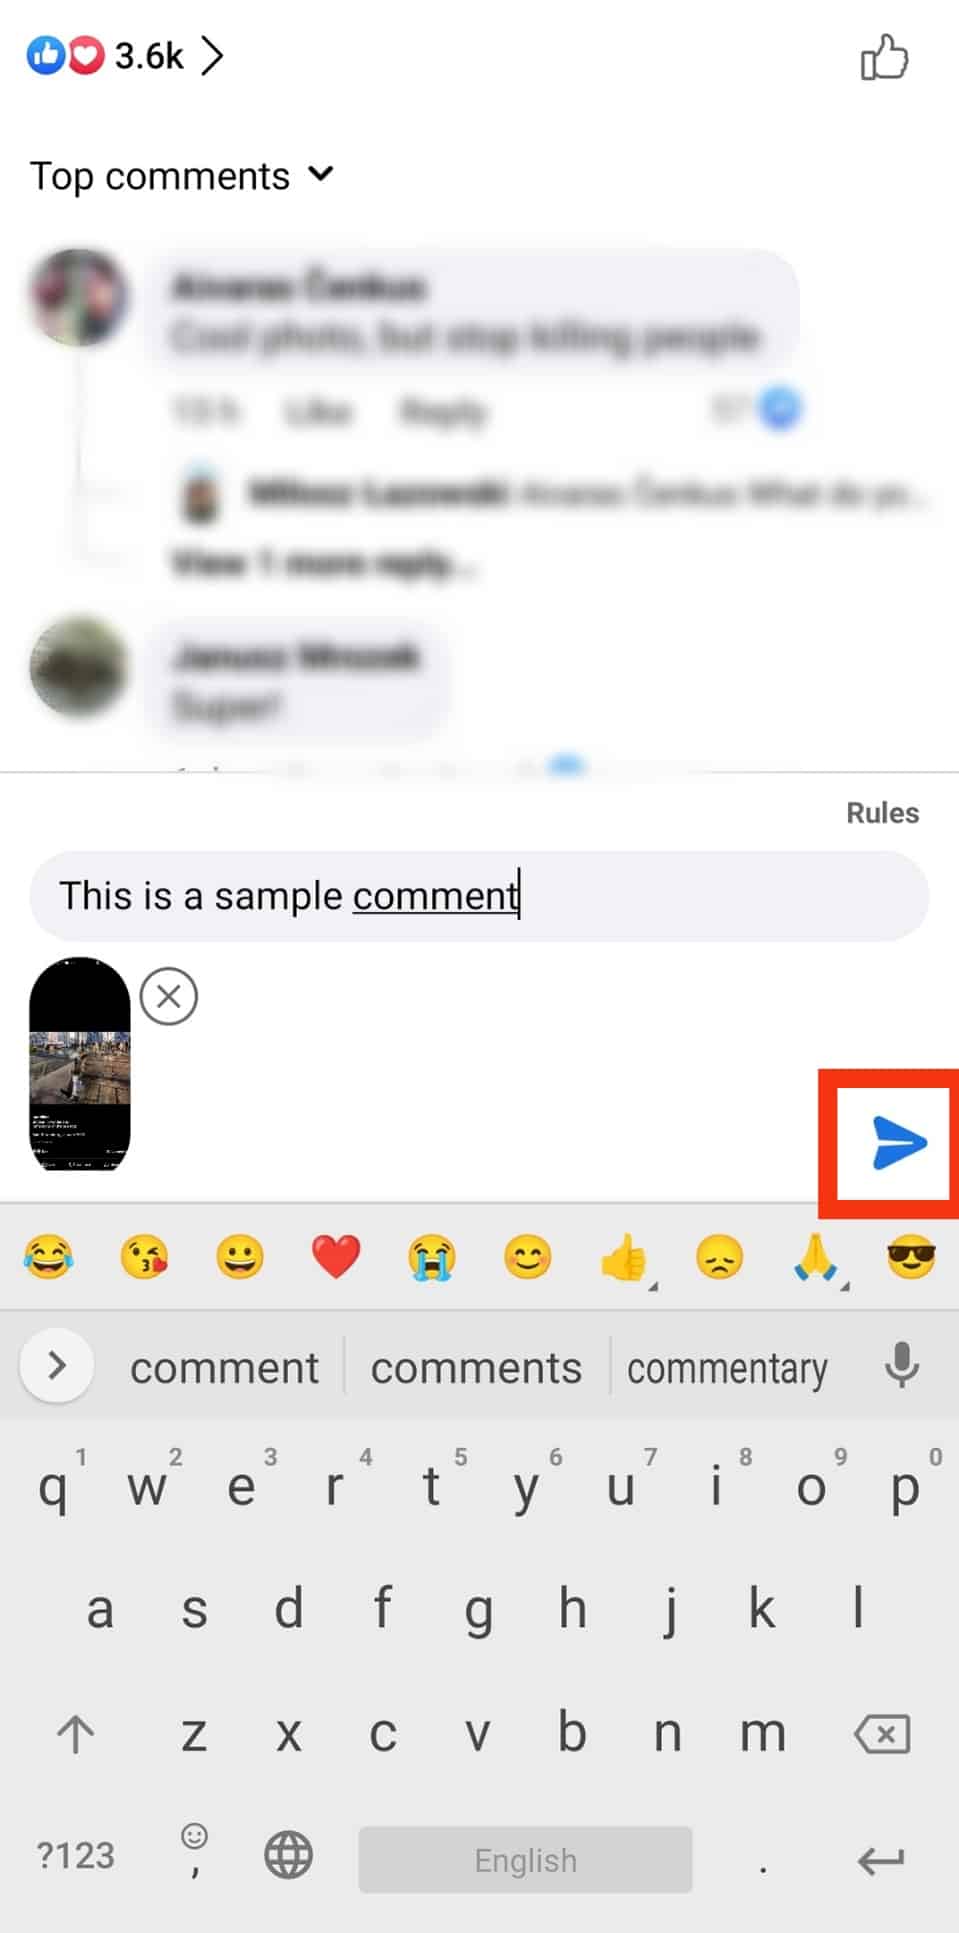 Tap The Blue Arrow Icon To Post The Comment